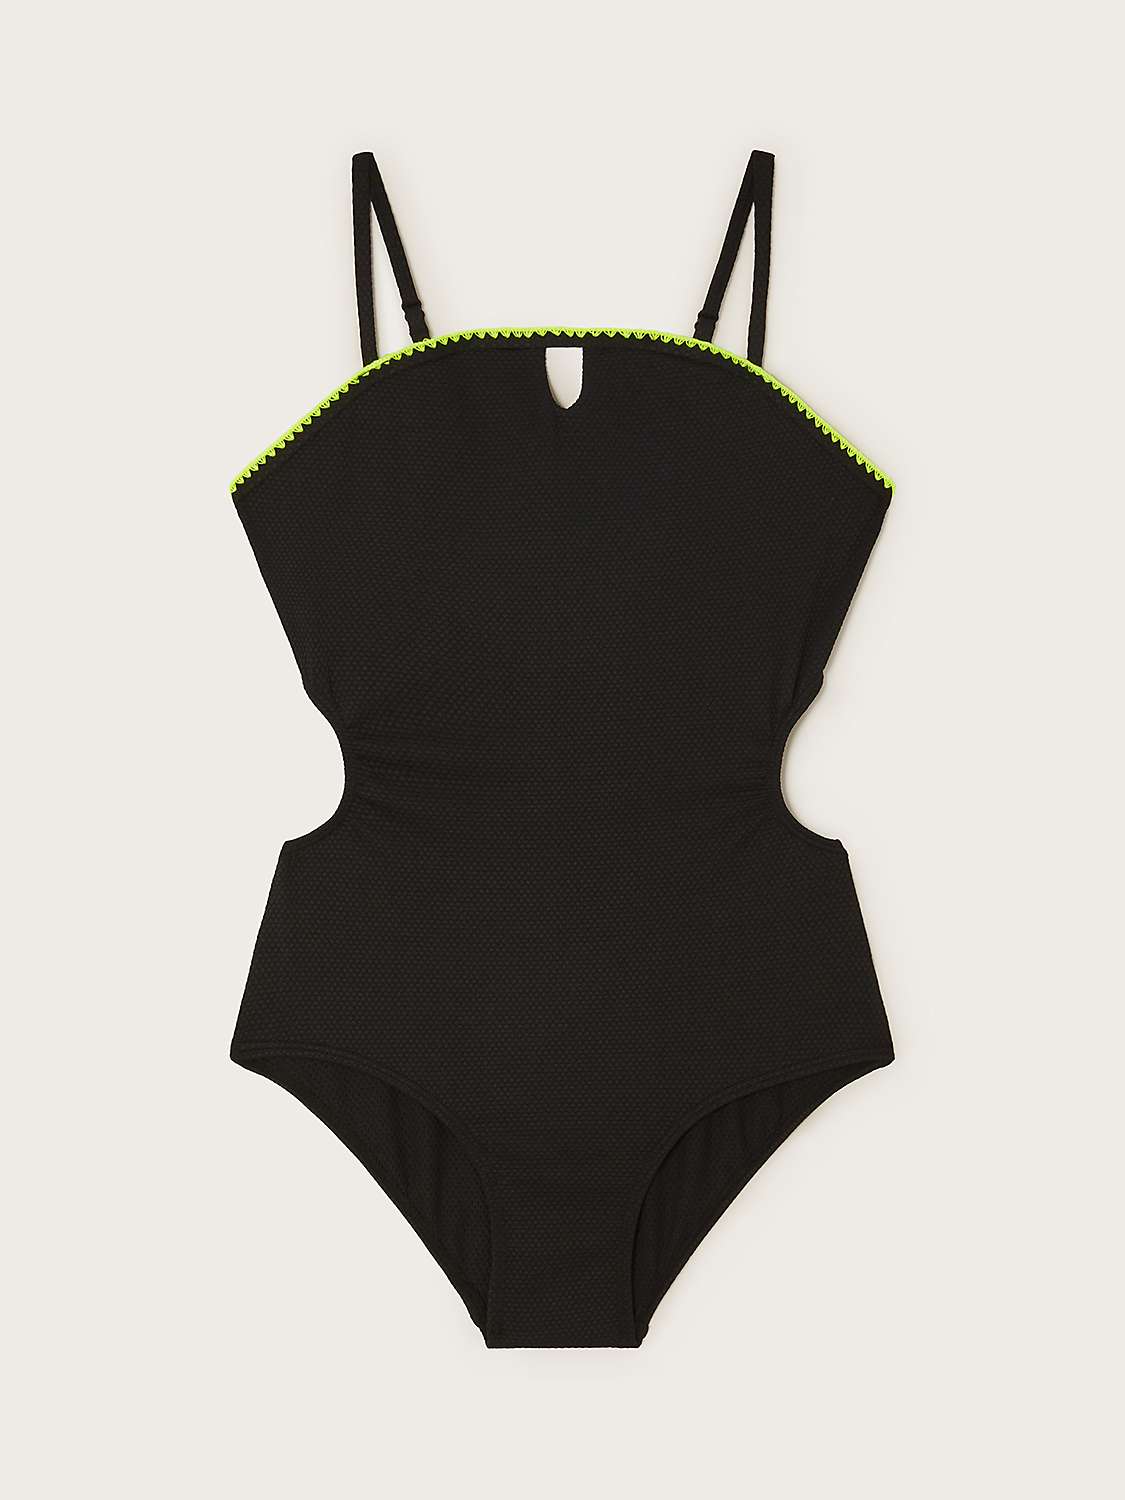 Buy Monsoon Kids' Storm Textured Cut Out Swimsuit, Black Online at johnlewis.com